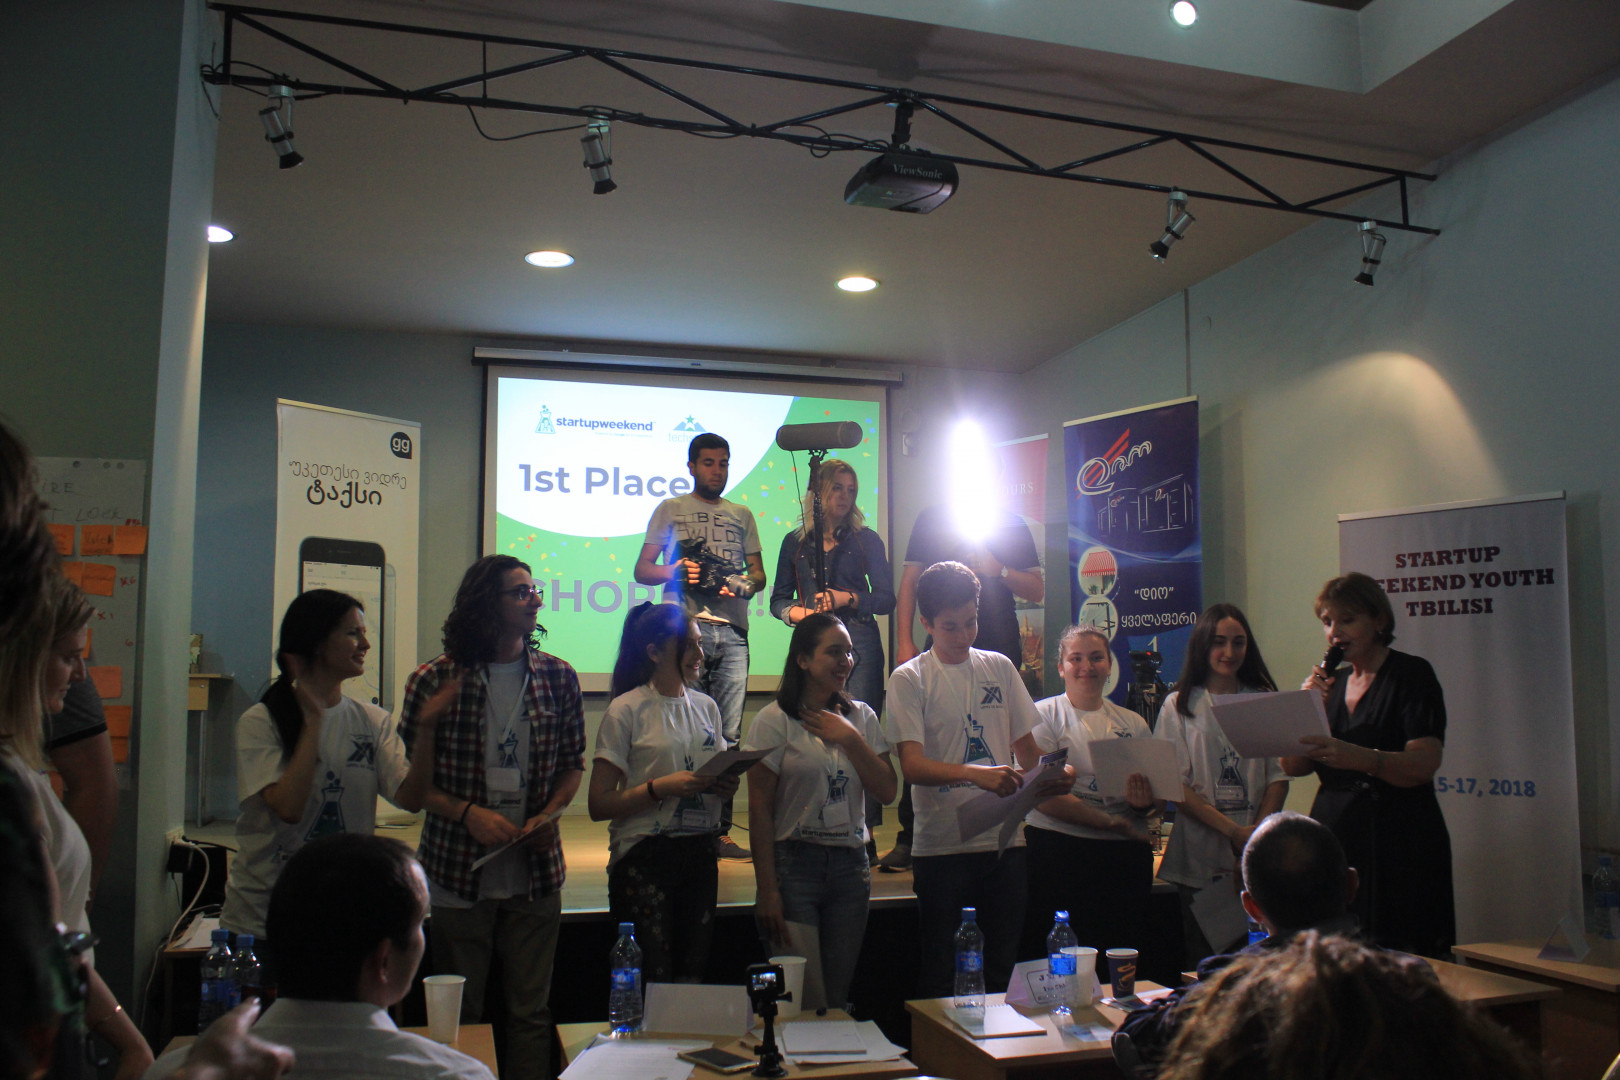 Start-Up Weekend Youth Tbilisi